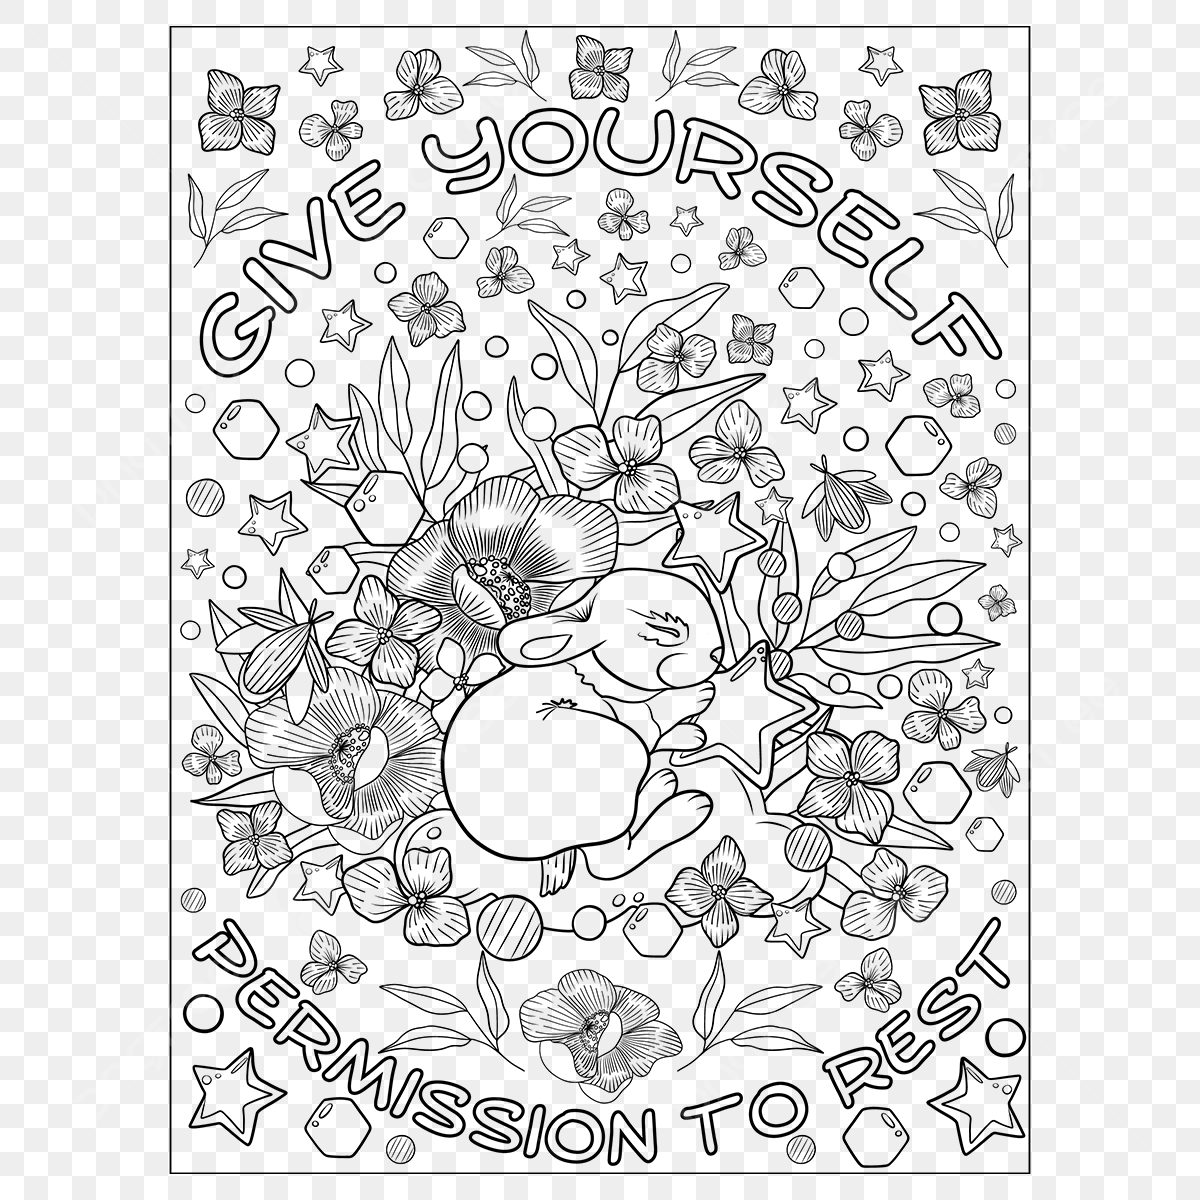 Adult coloring pages vector design images relaxing coloring book page for young adults book drawing ring drawing color drawing png image for free download